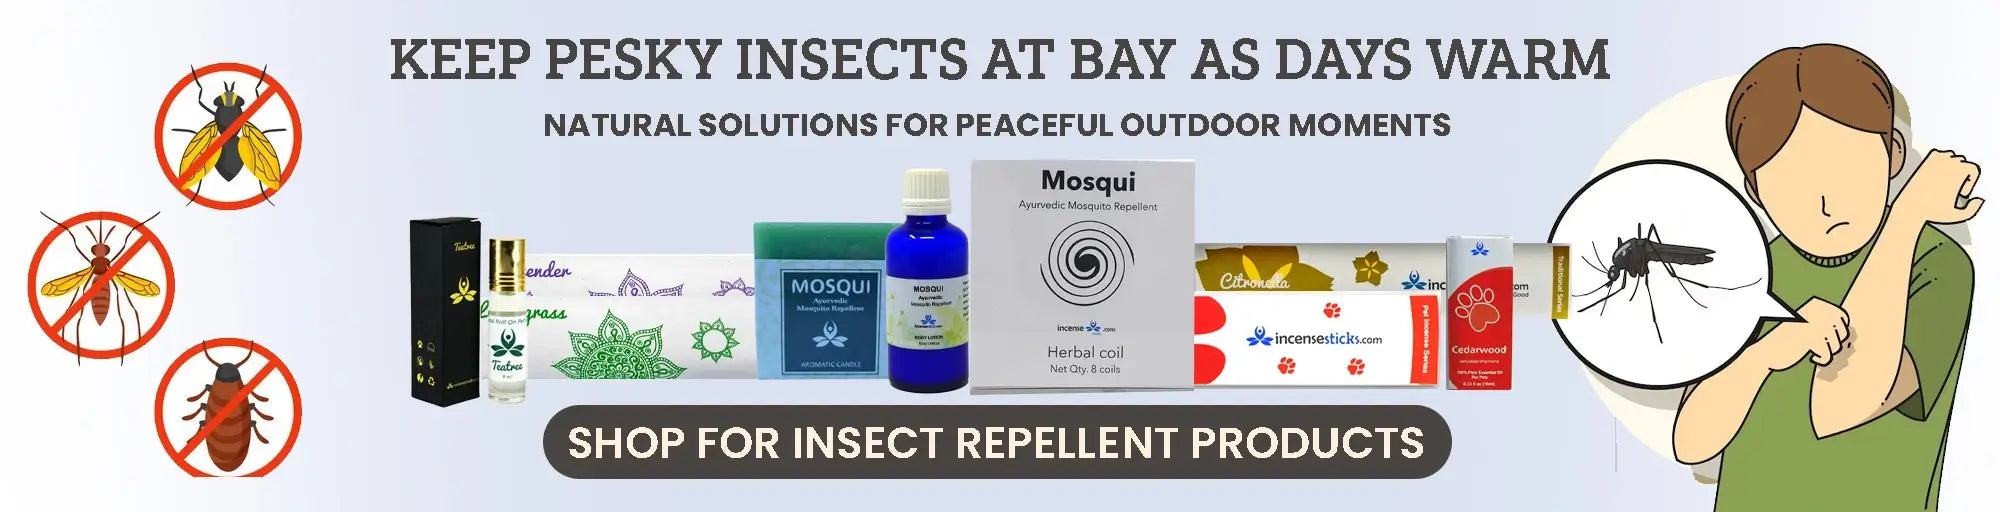 Natural Insect Repellent Products for Peaceful Outdoor Visits